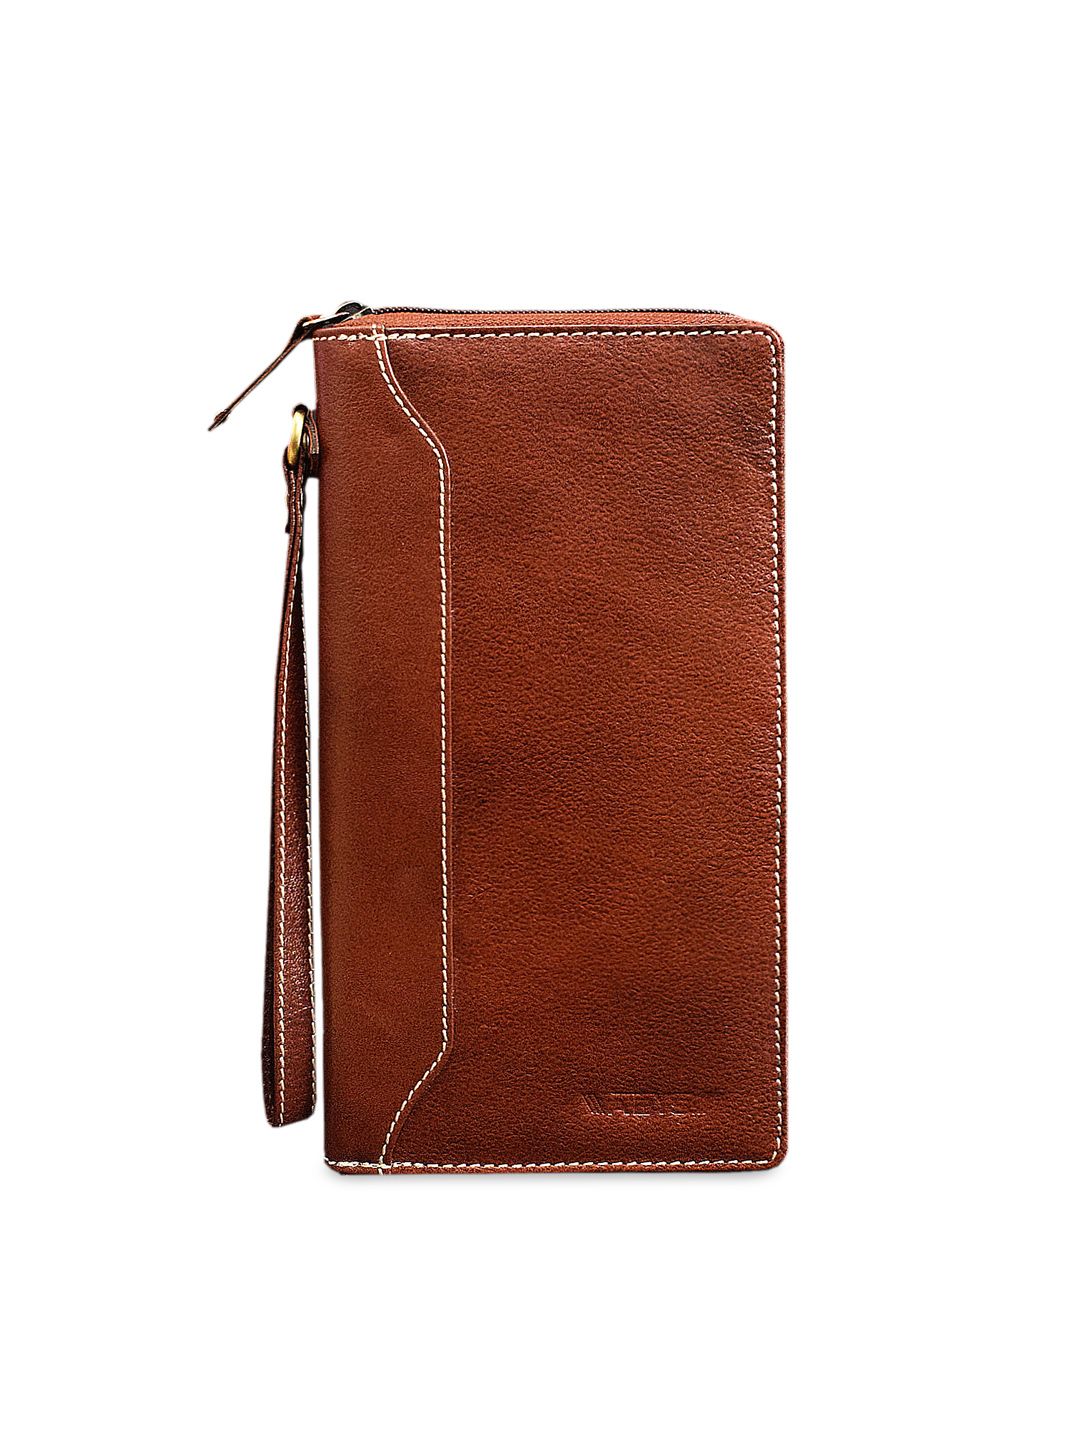 ABYS Unisex Brown Solid Leather Passport Holder Price in India